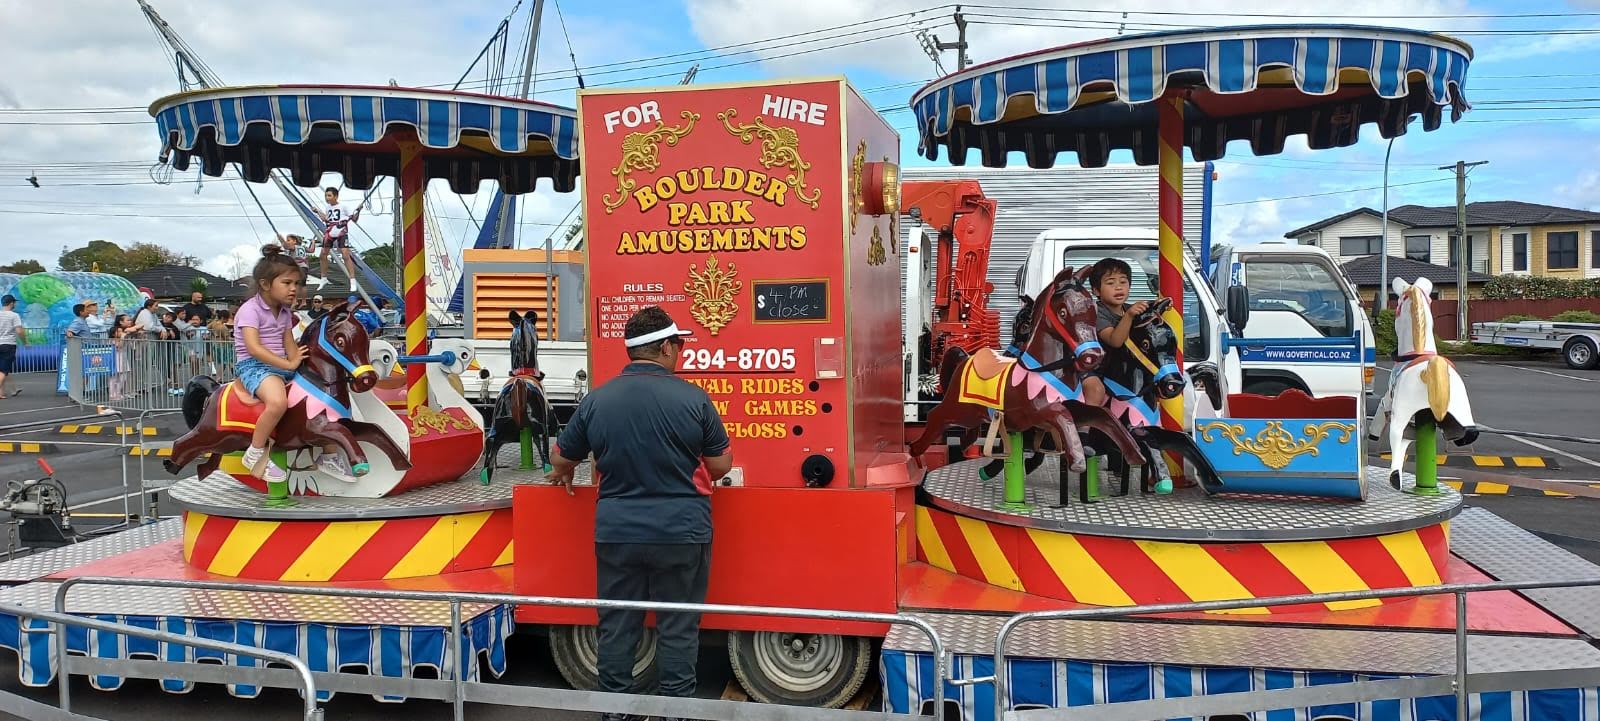 Amusement Ride Merry Go Round for hire